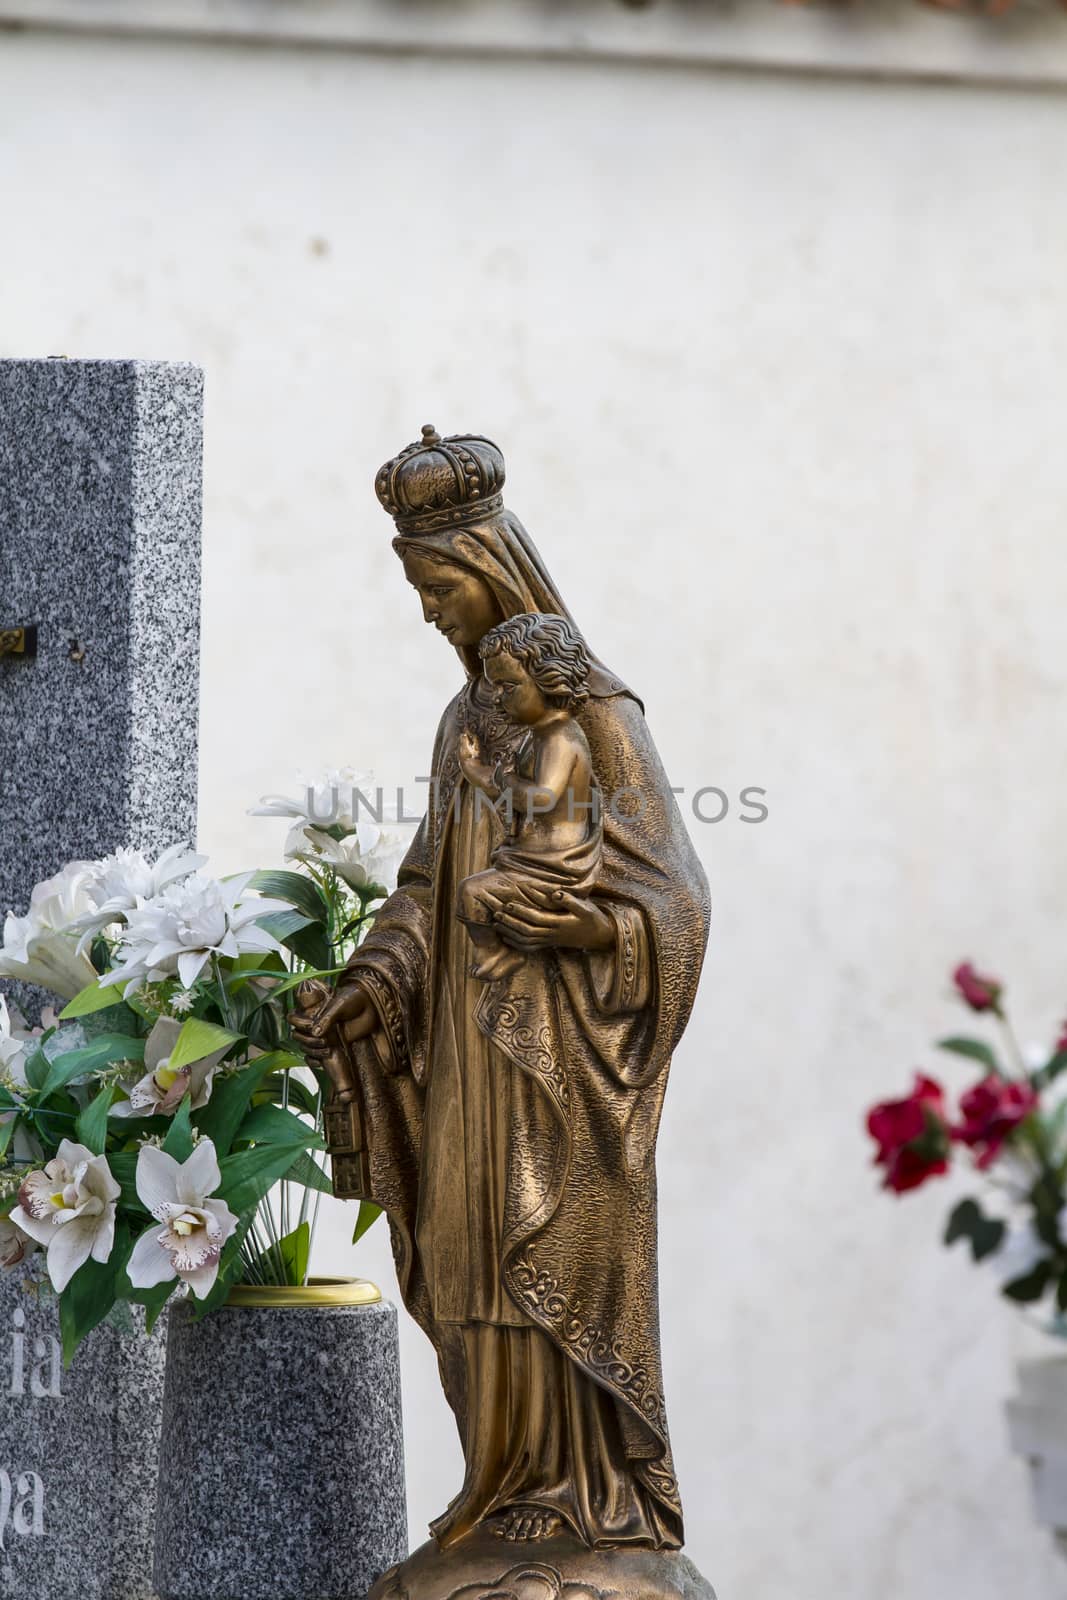 sculpture of the Virgin Mary in a cemetery by FernandoCortes